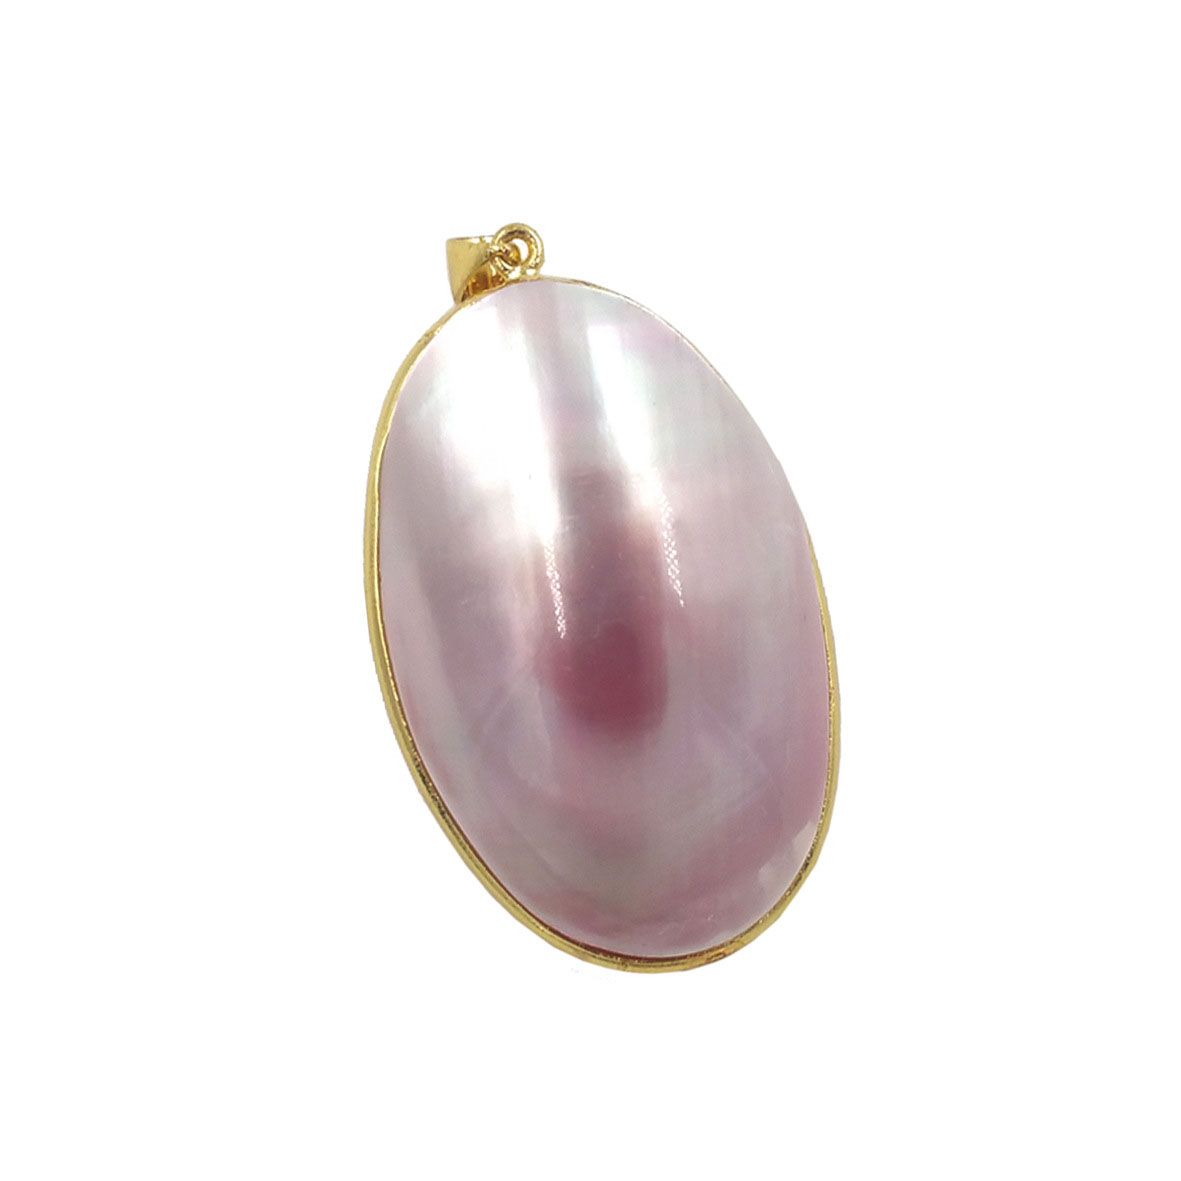 2:Large pink shell 23-27x34-39mm